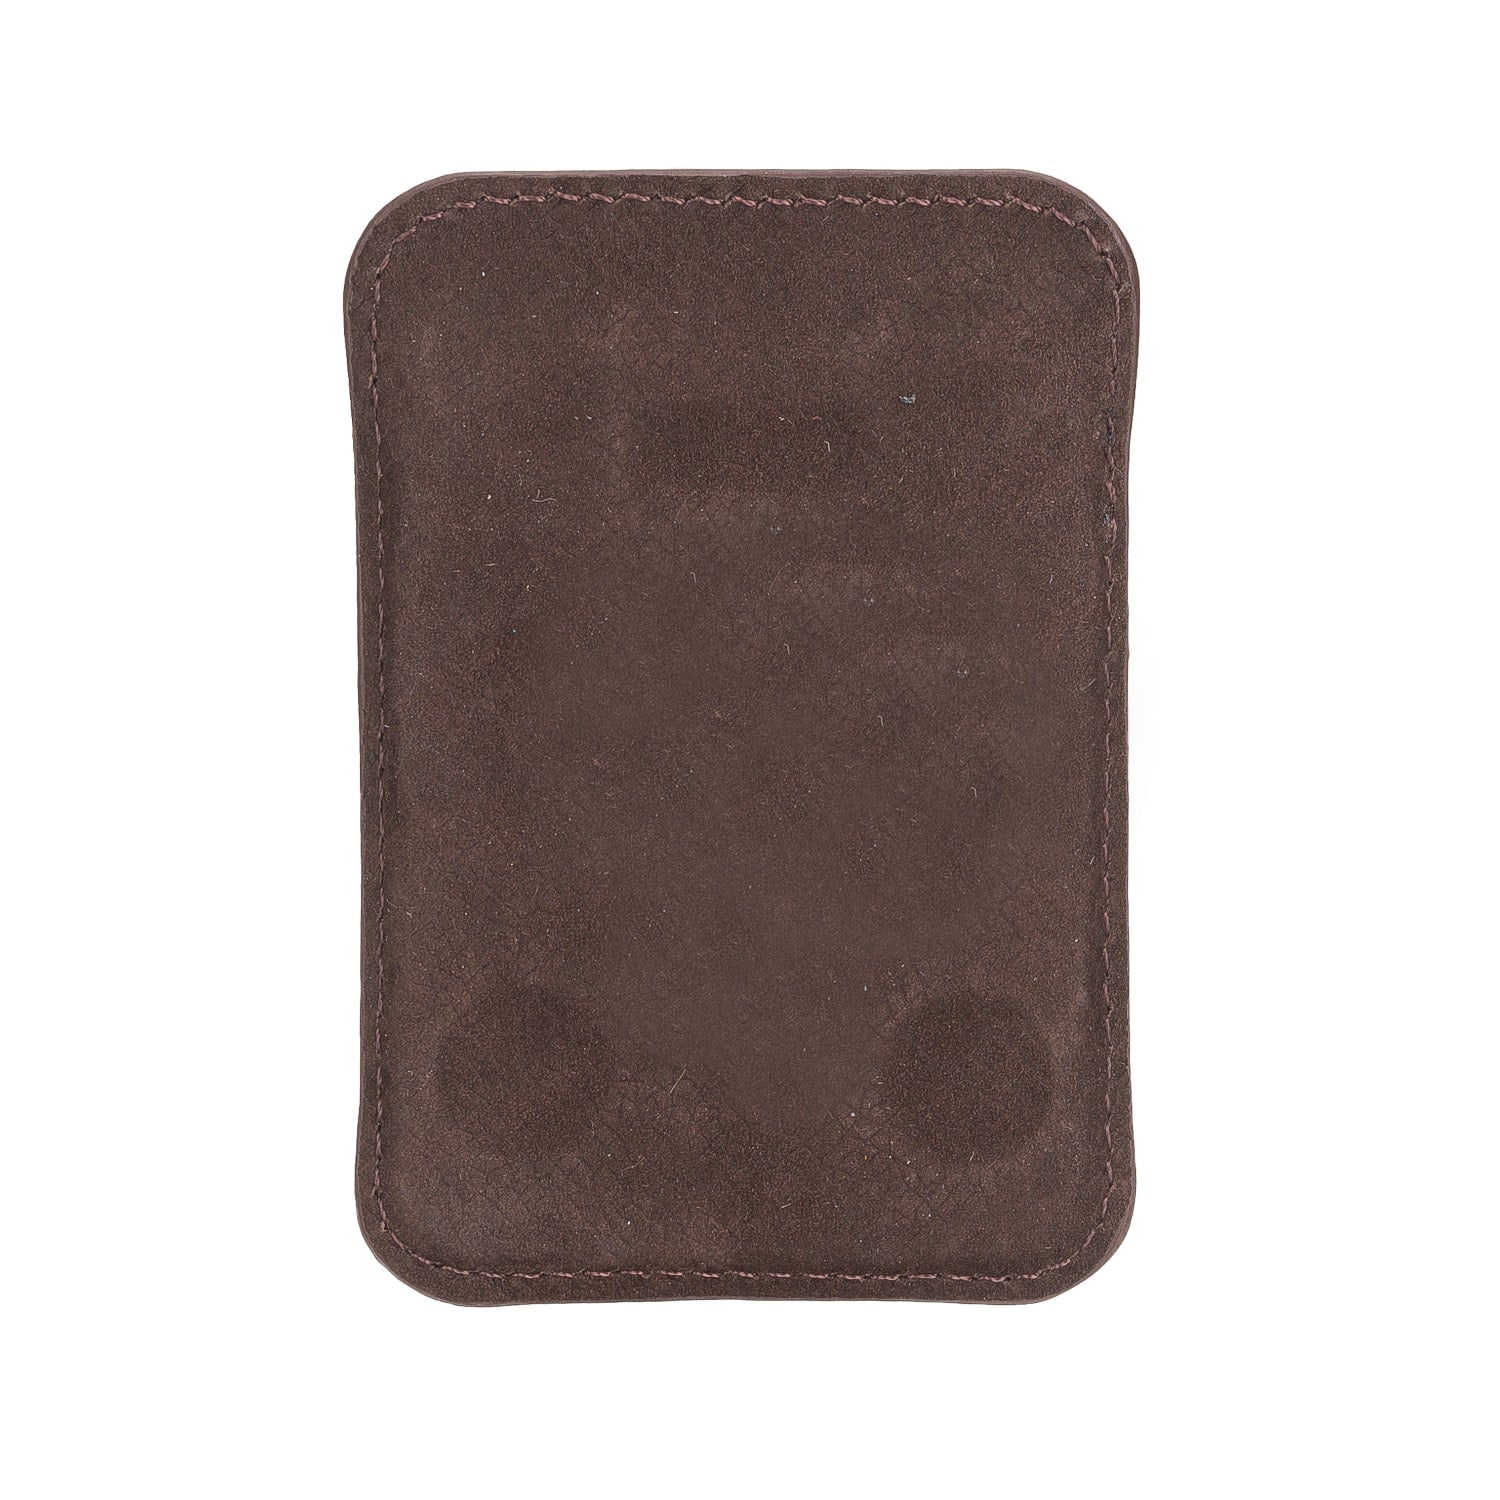 Tan Brown Leather Apple MagSafe Card Holder Magnetic Wallet for iPhone - Bomonti - 5